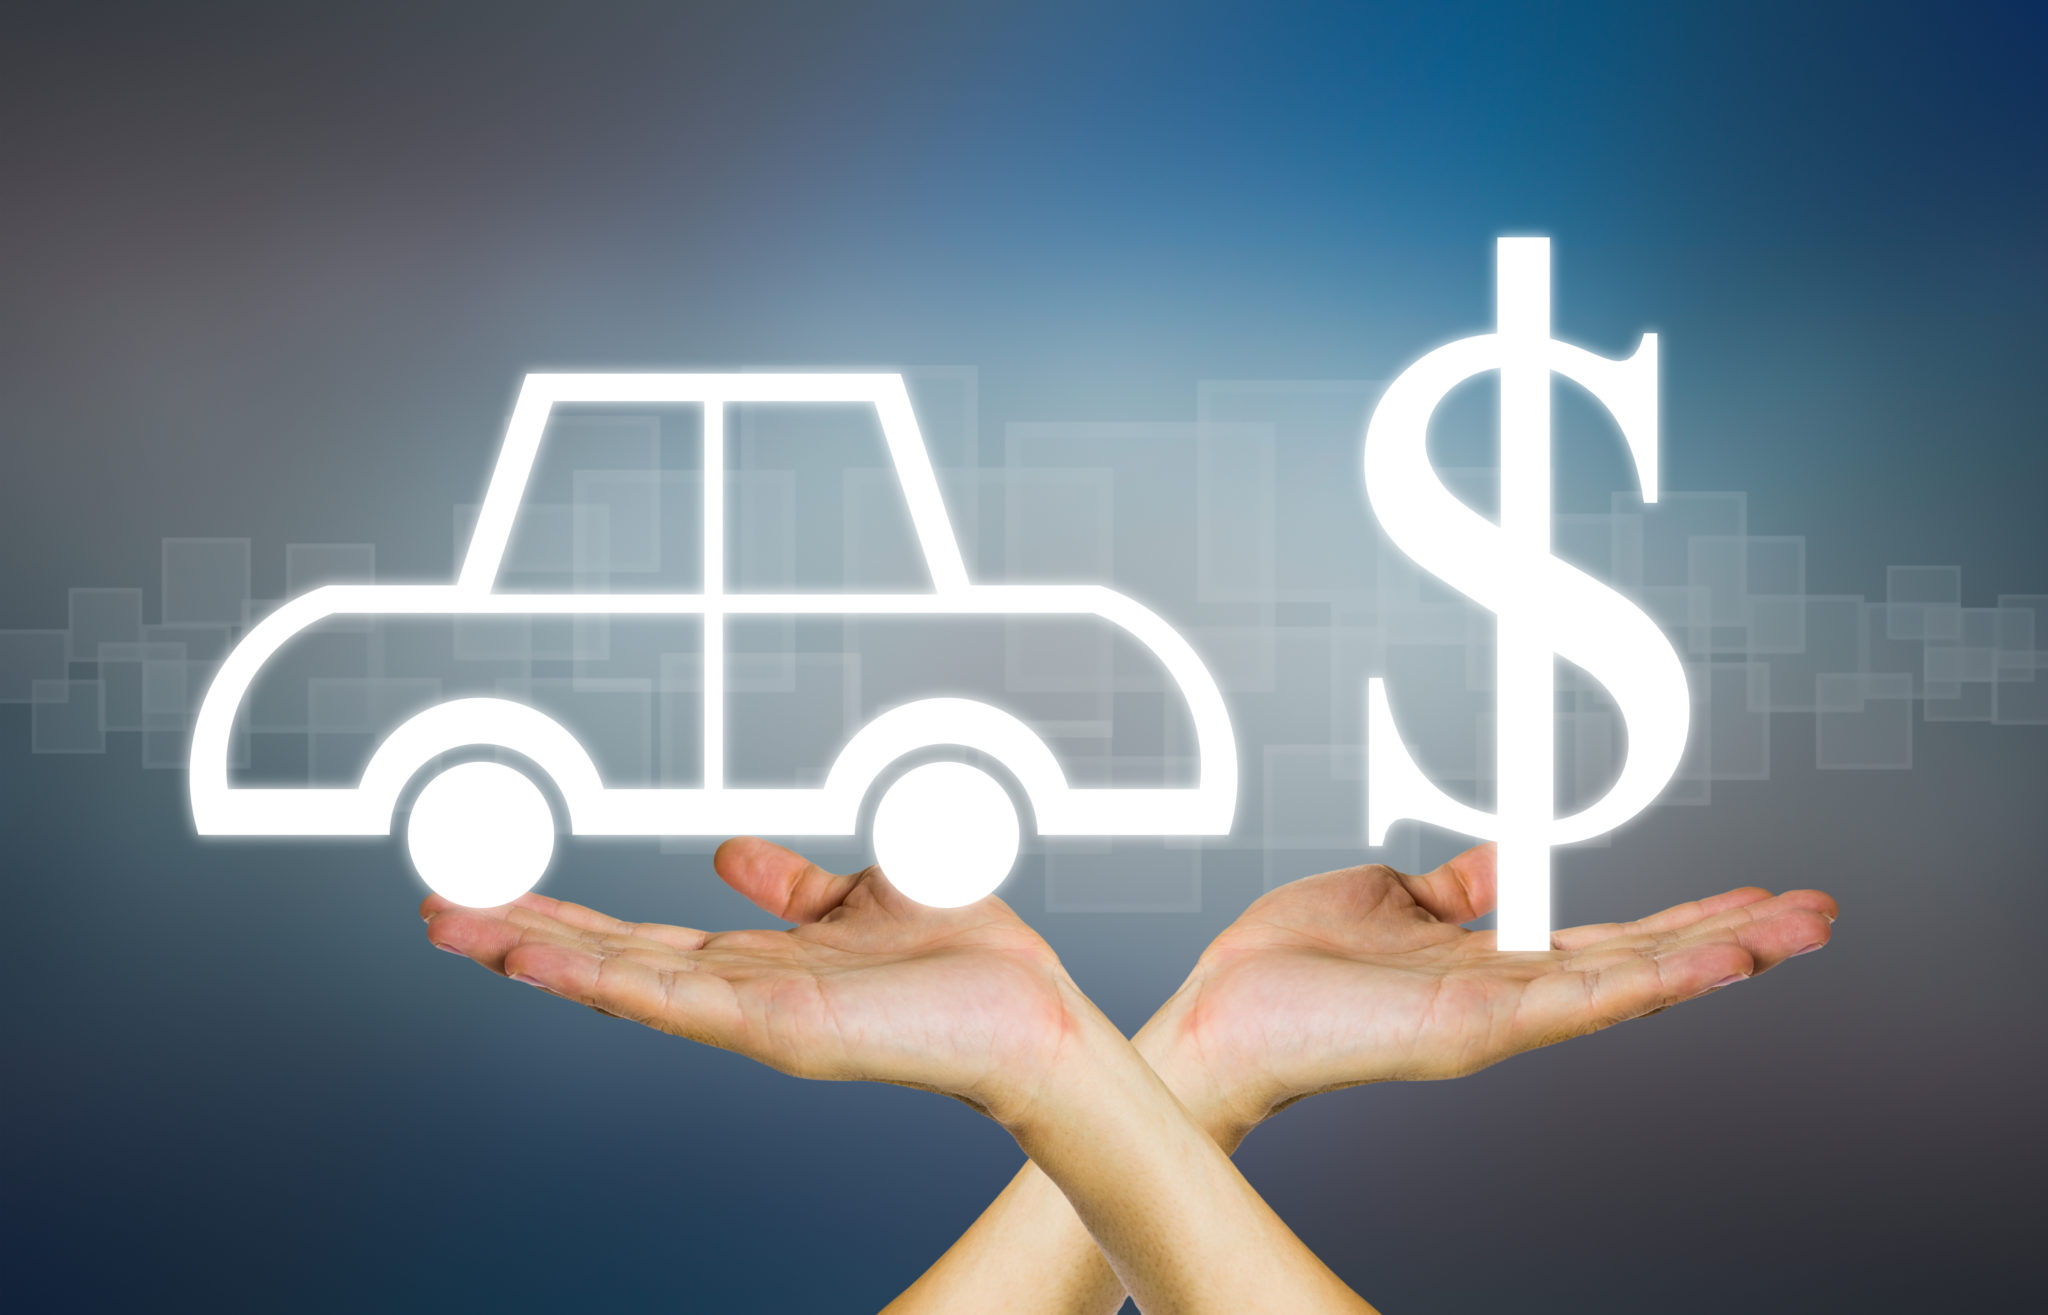 Illustration of hands holding a vehicle in one hand and a dollar sign in the other to represent insurance settlement choices